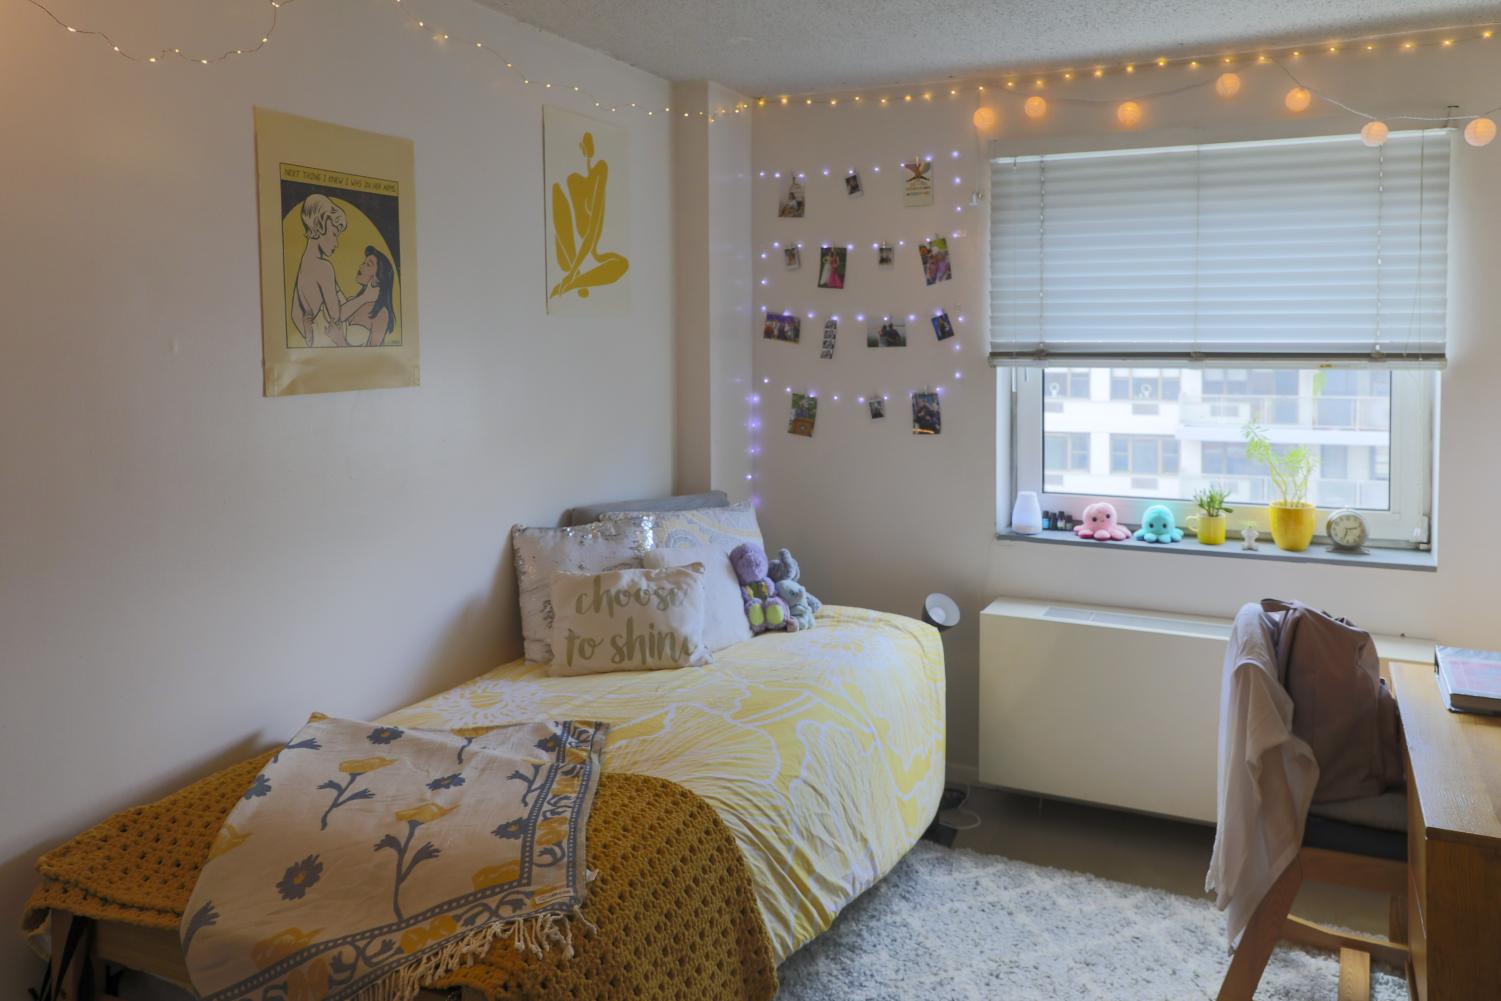 Lily Candelaria's dorm room has her bed on the left side with yellow accents and decorative pillows on top. The wall above the bed features two decorative posters and a string of Polaroid photos of Lily’s friends and family. Lily’s windowsill has many decorative pieces sitting on it.